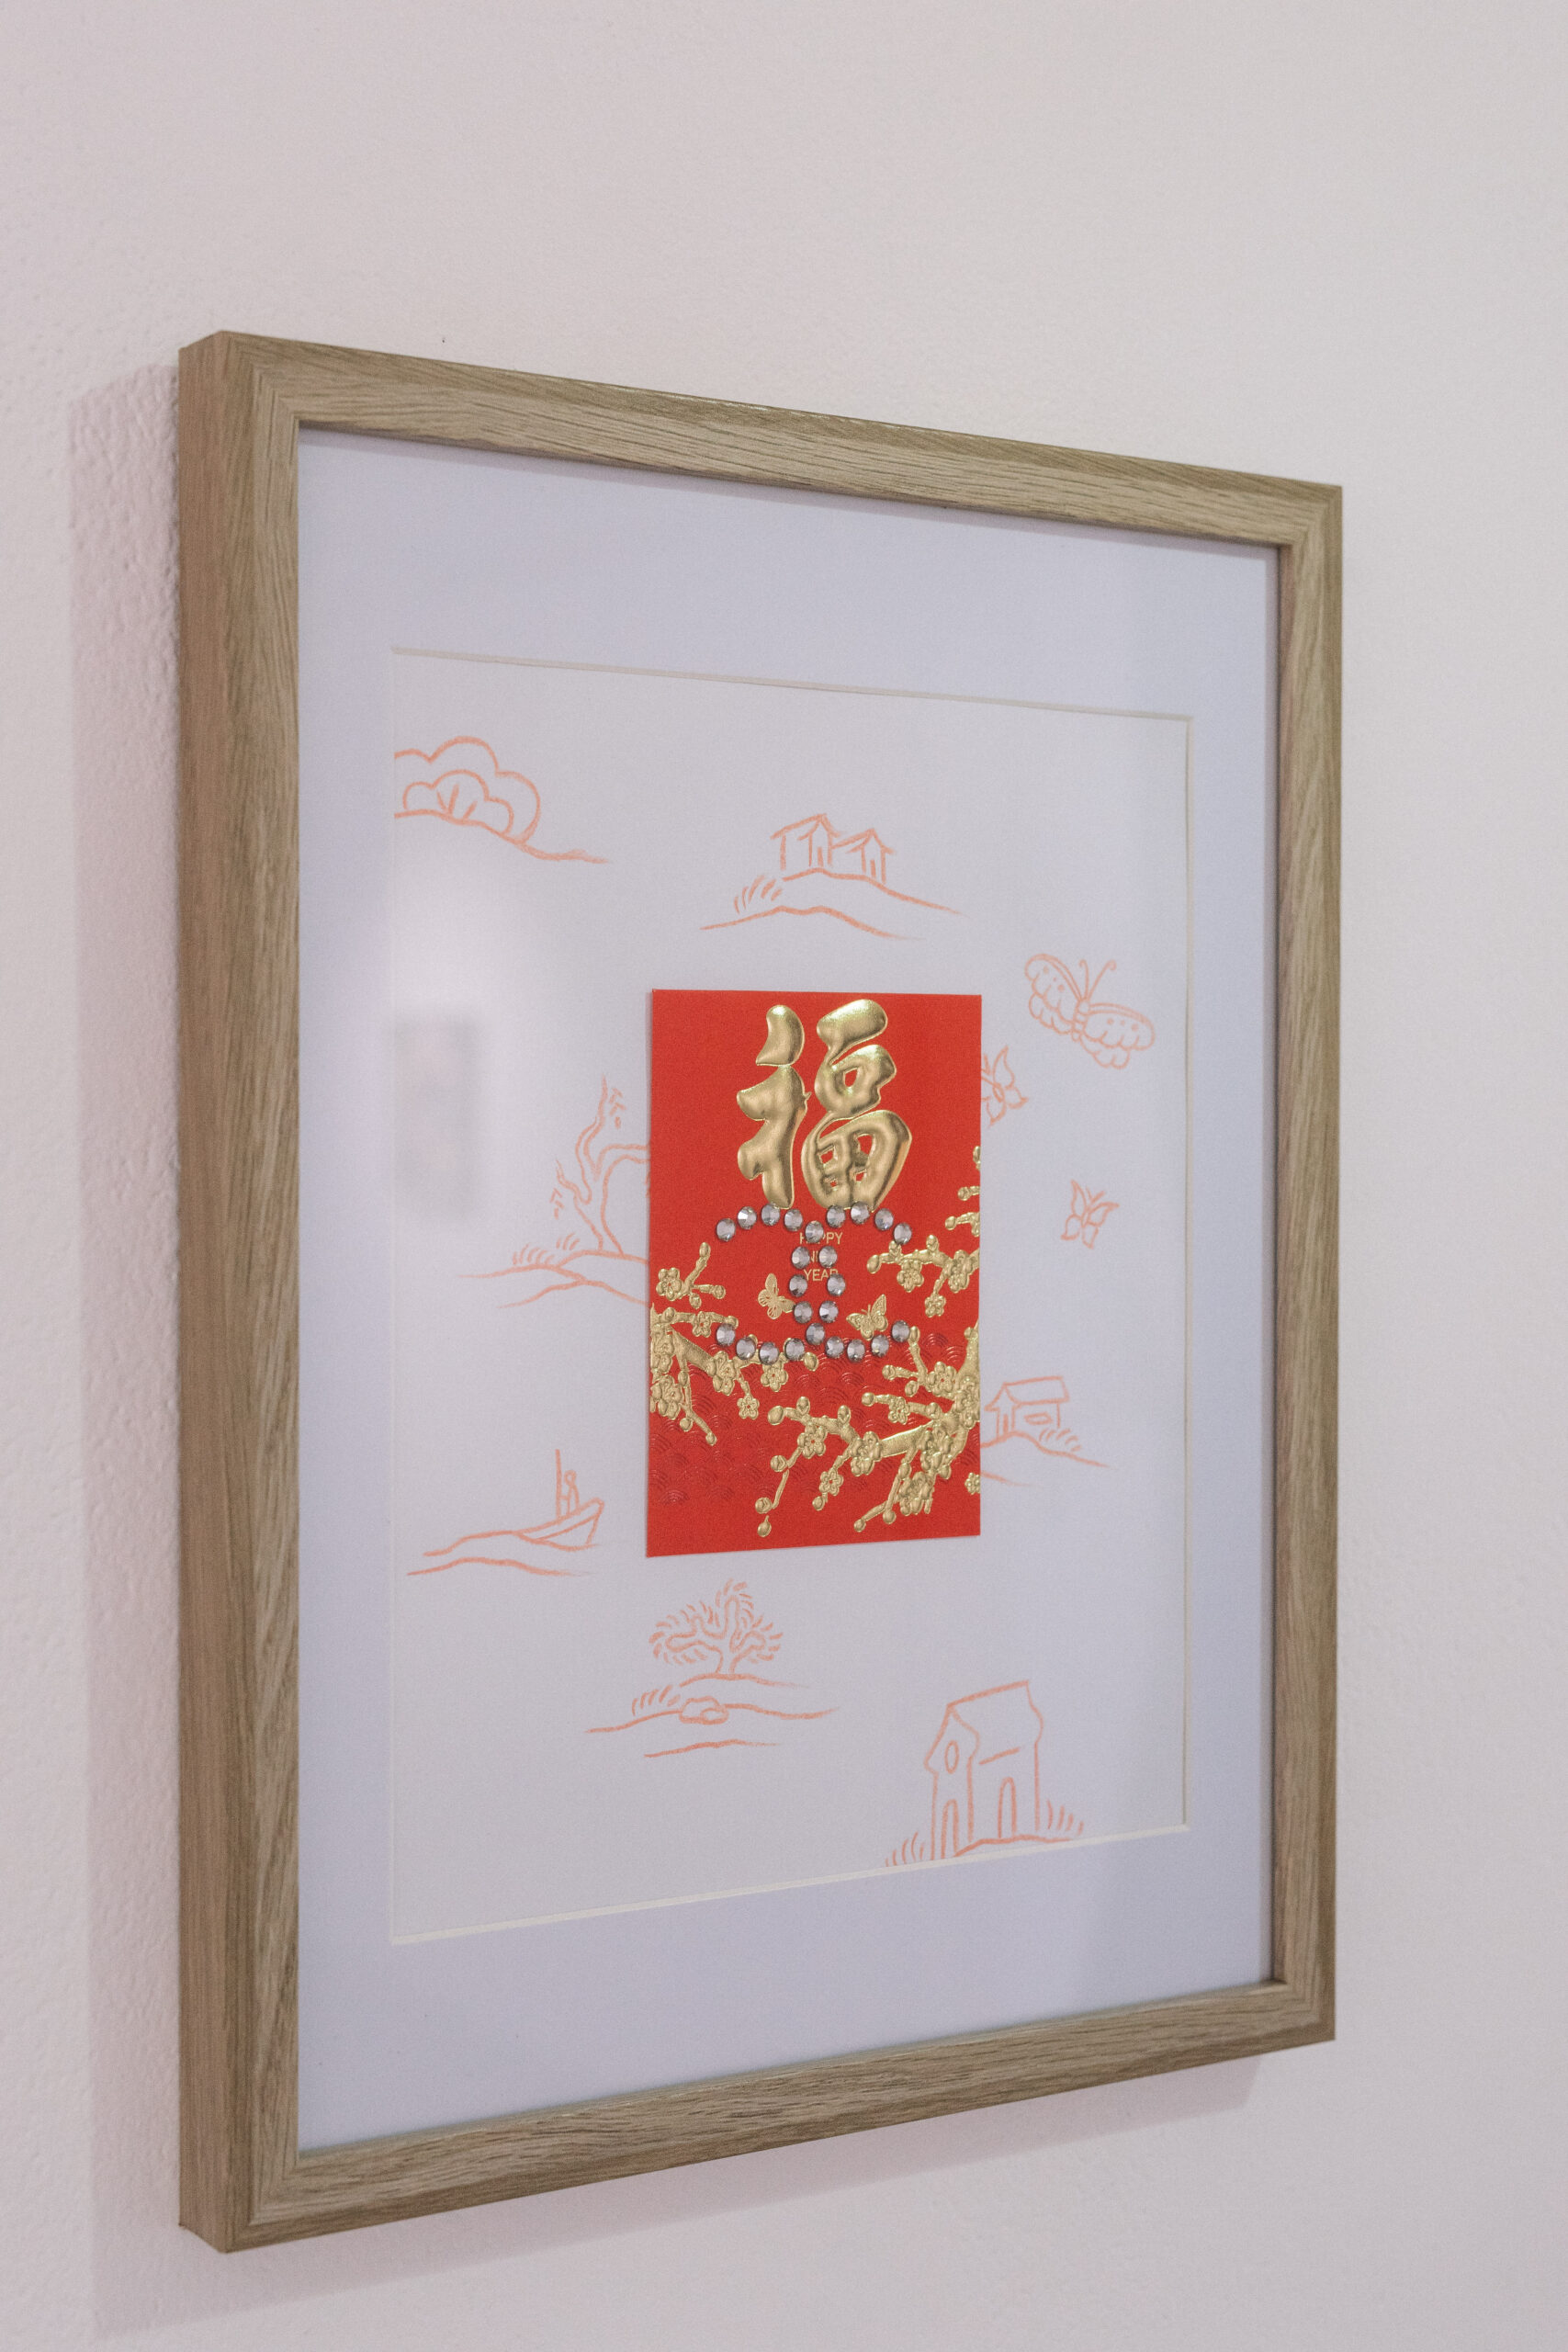 Timber framed artwork of paper with re pencil drawings, paper Hong Bao and Swarovski Crystals forming Coco Chanel Symbol.